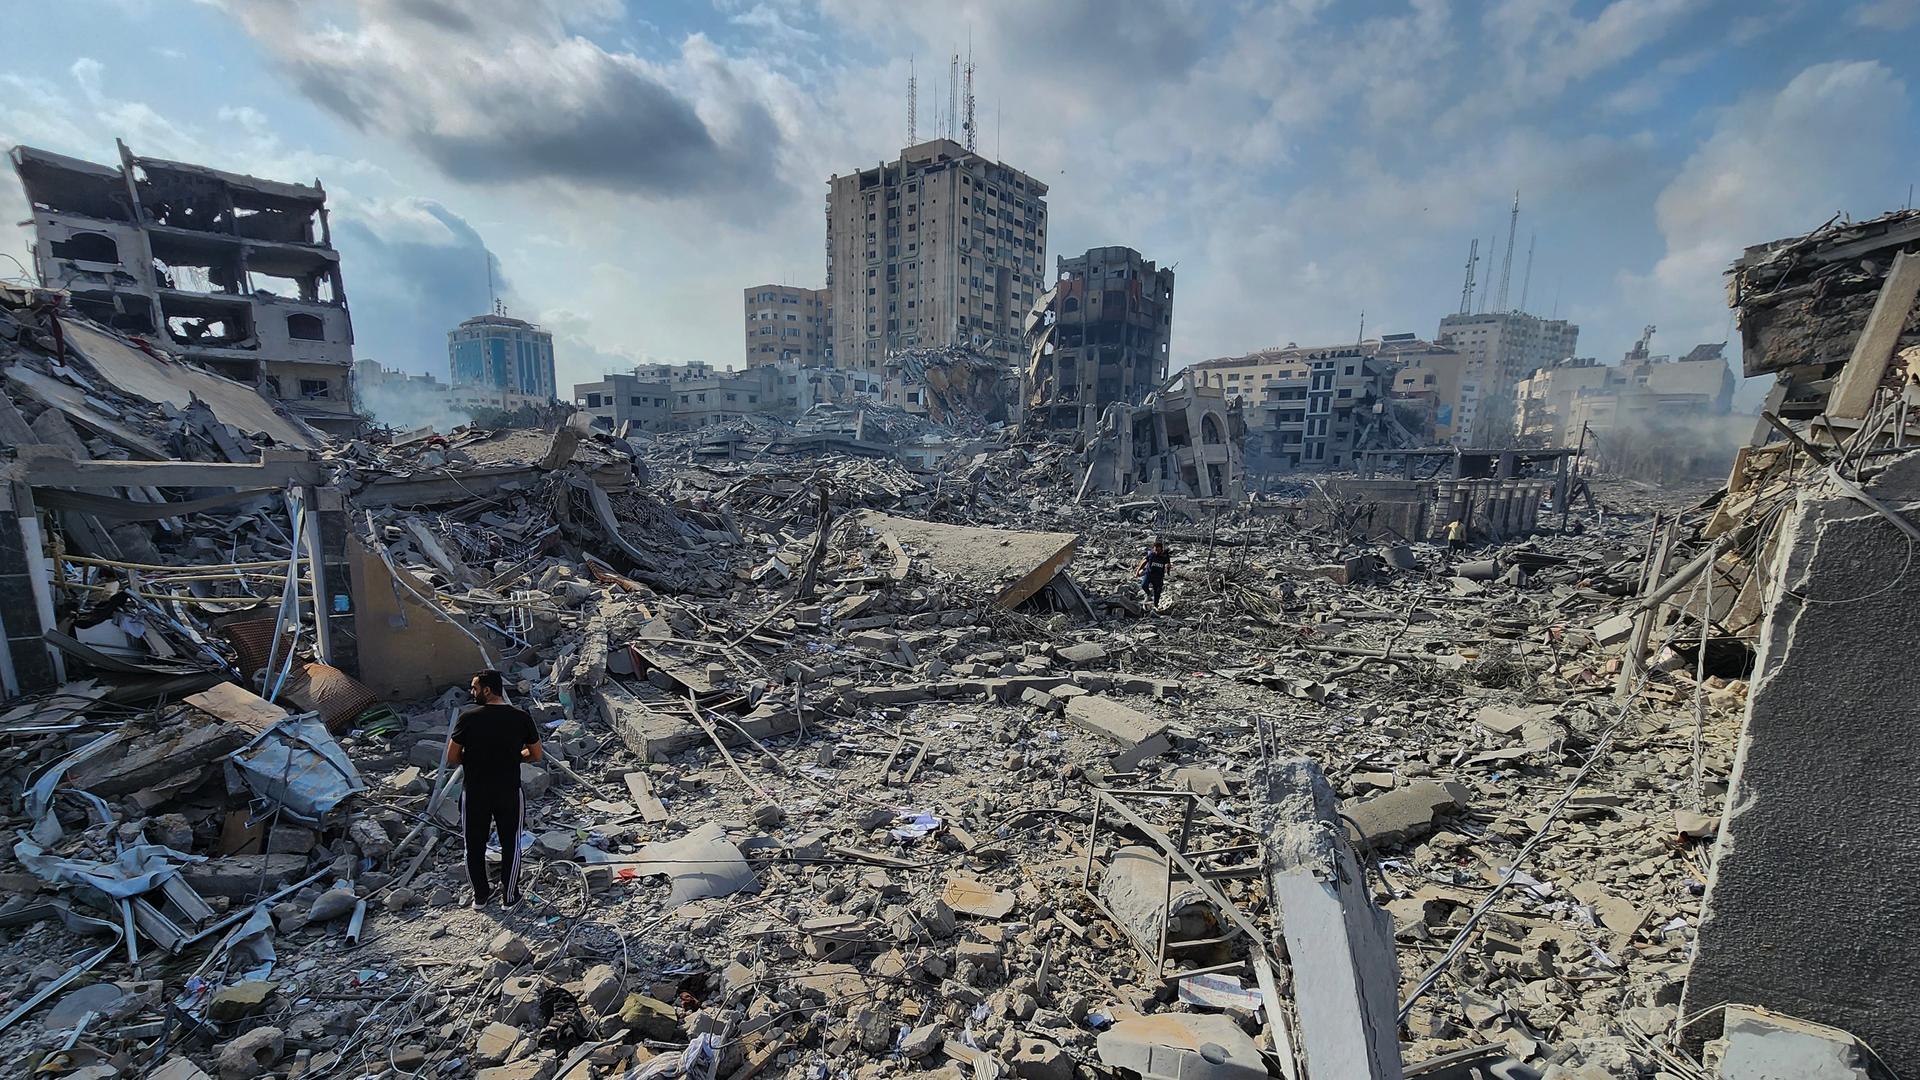 Rubble from destroyed building and homes in Gaza